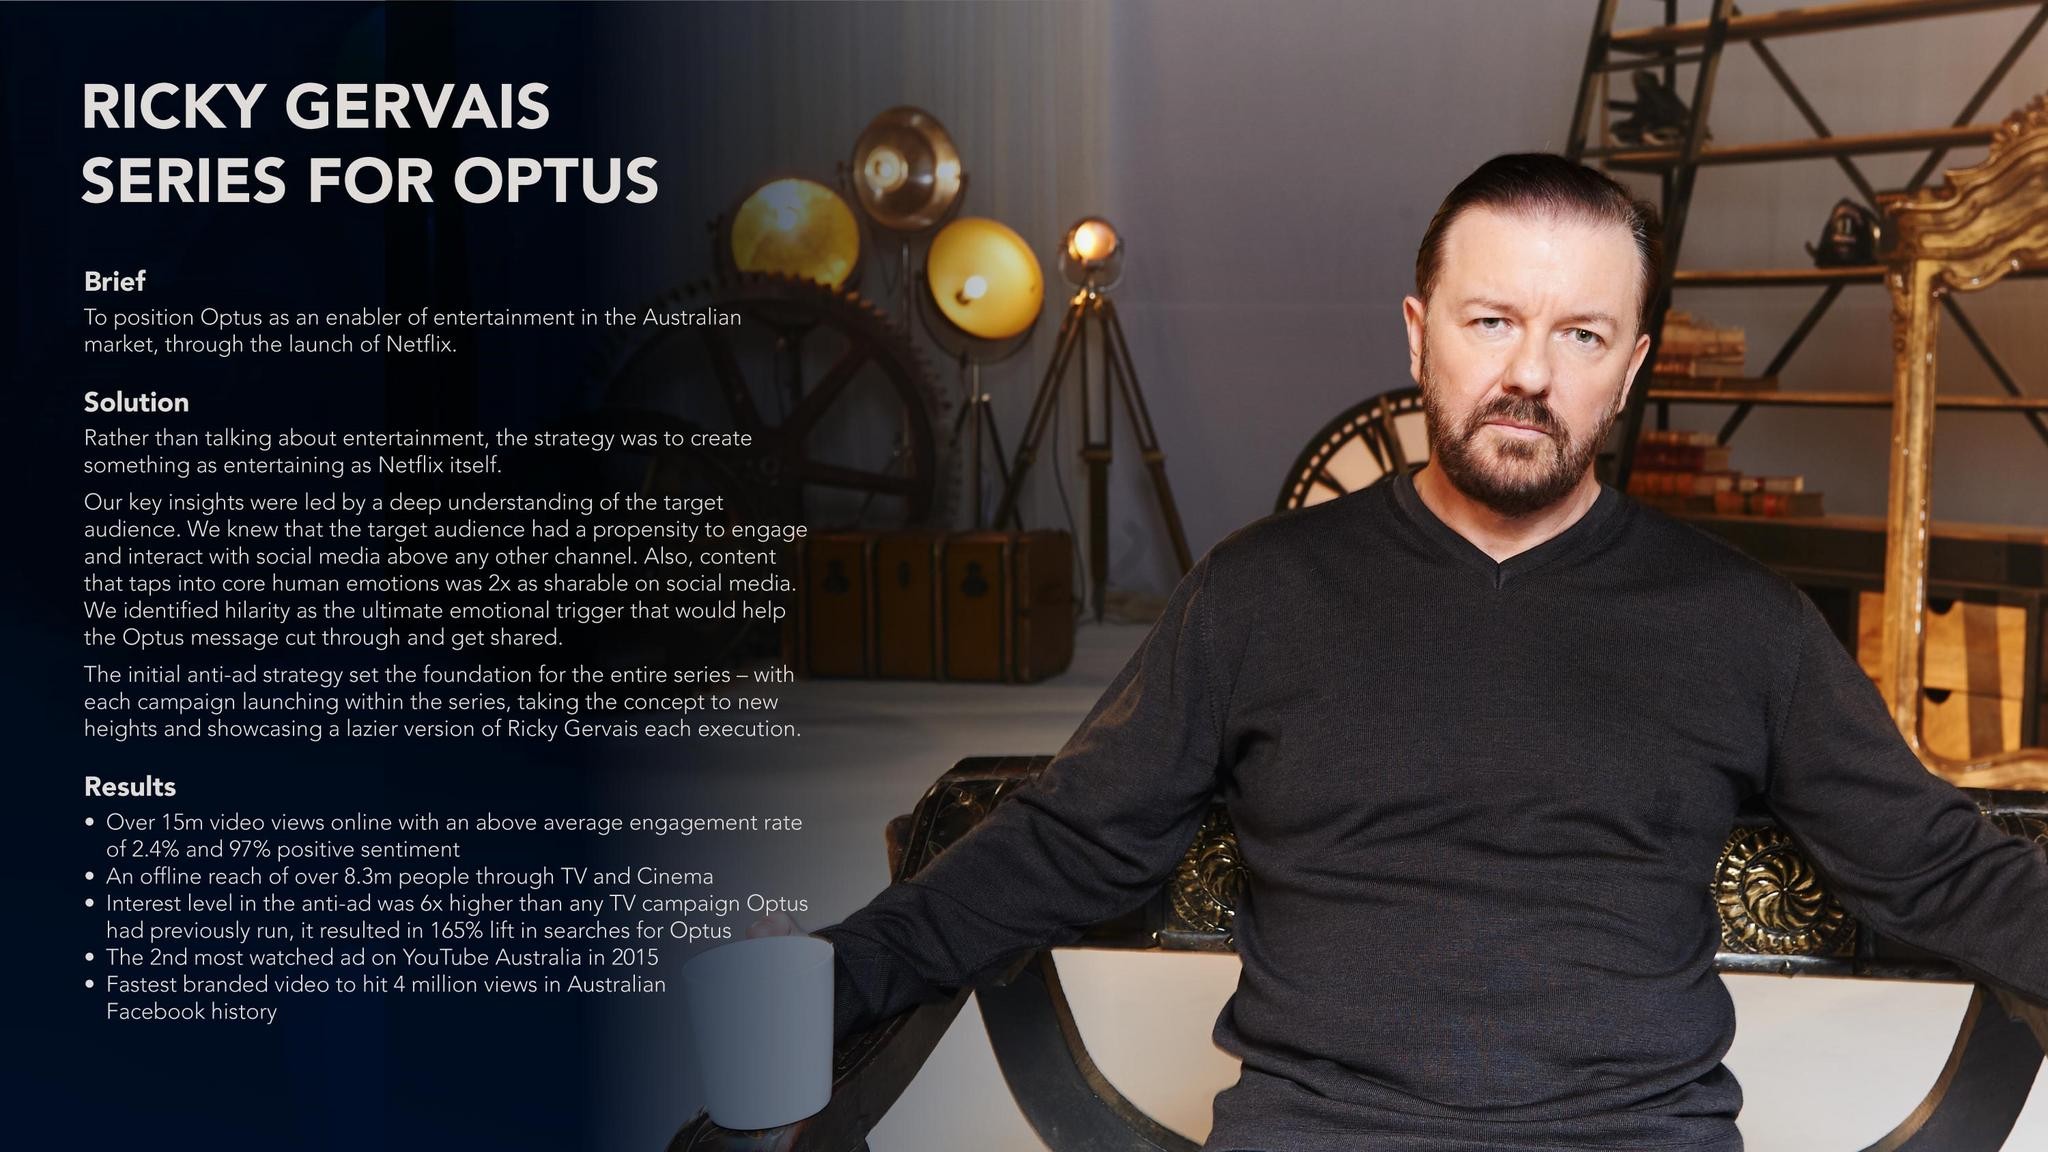 Ricky Gervais Series for Optus